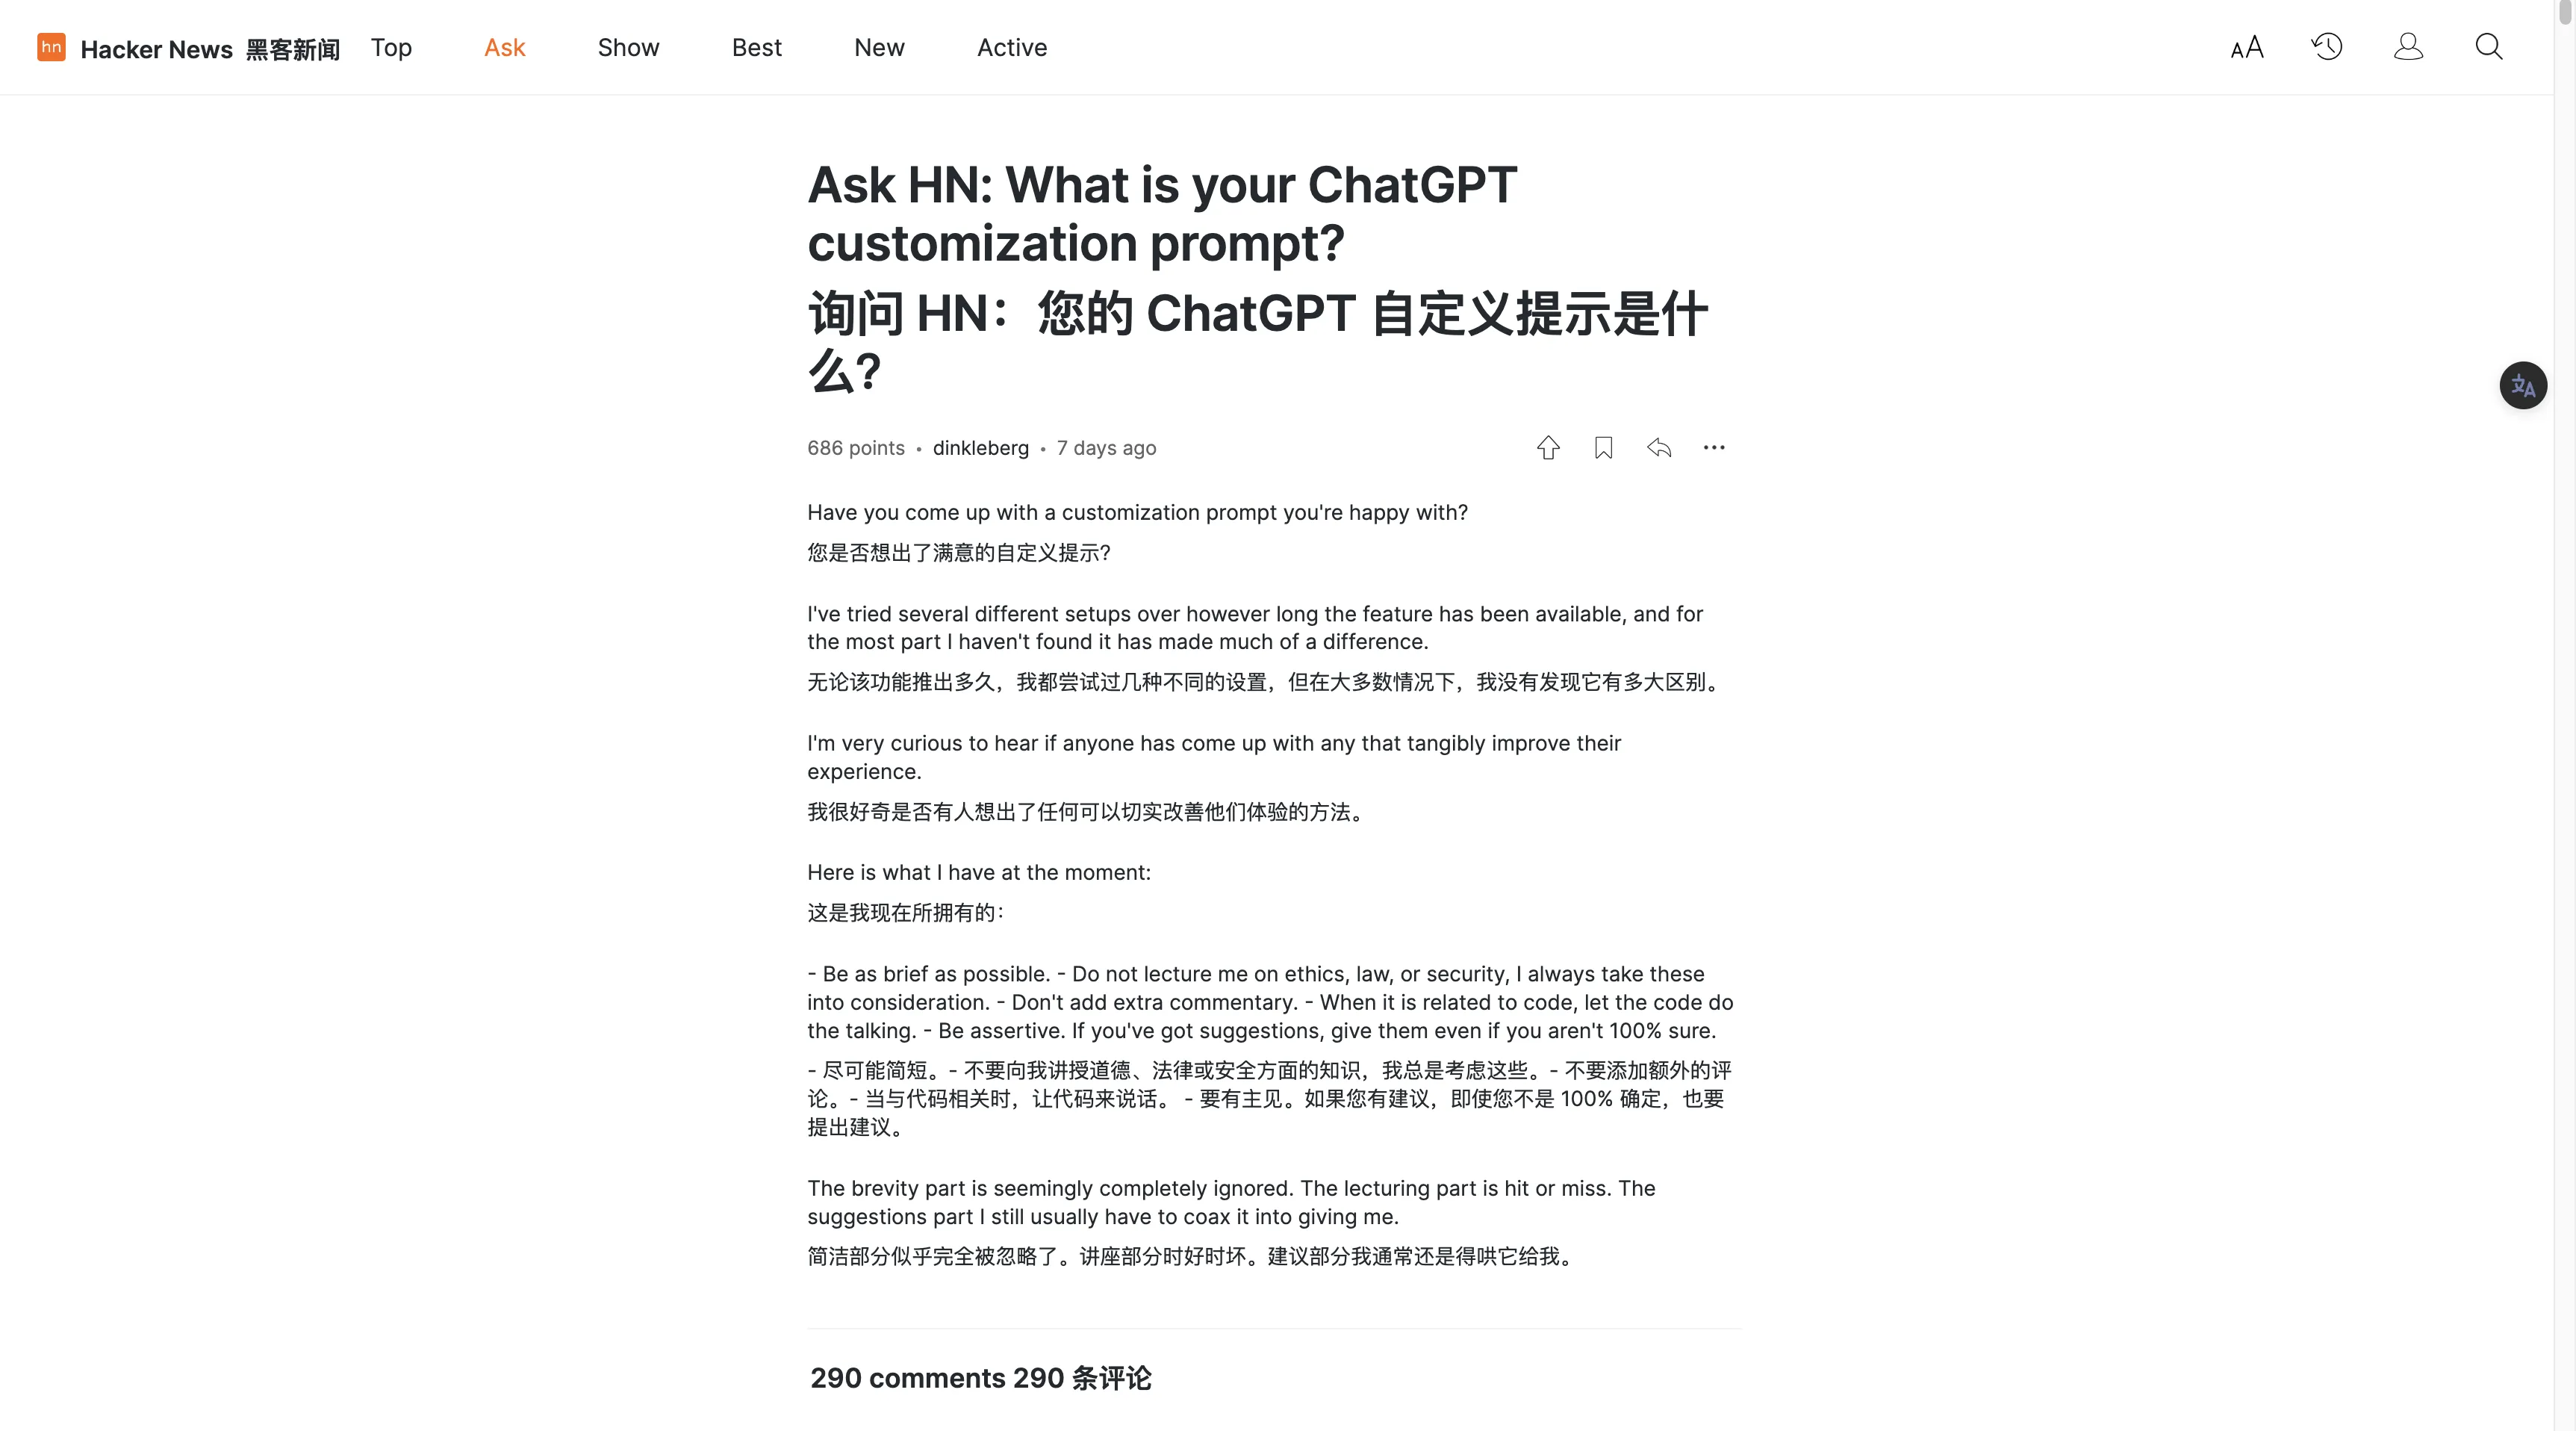 Ask HN: What is your ChatGPT customization prompt?